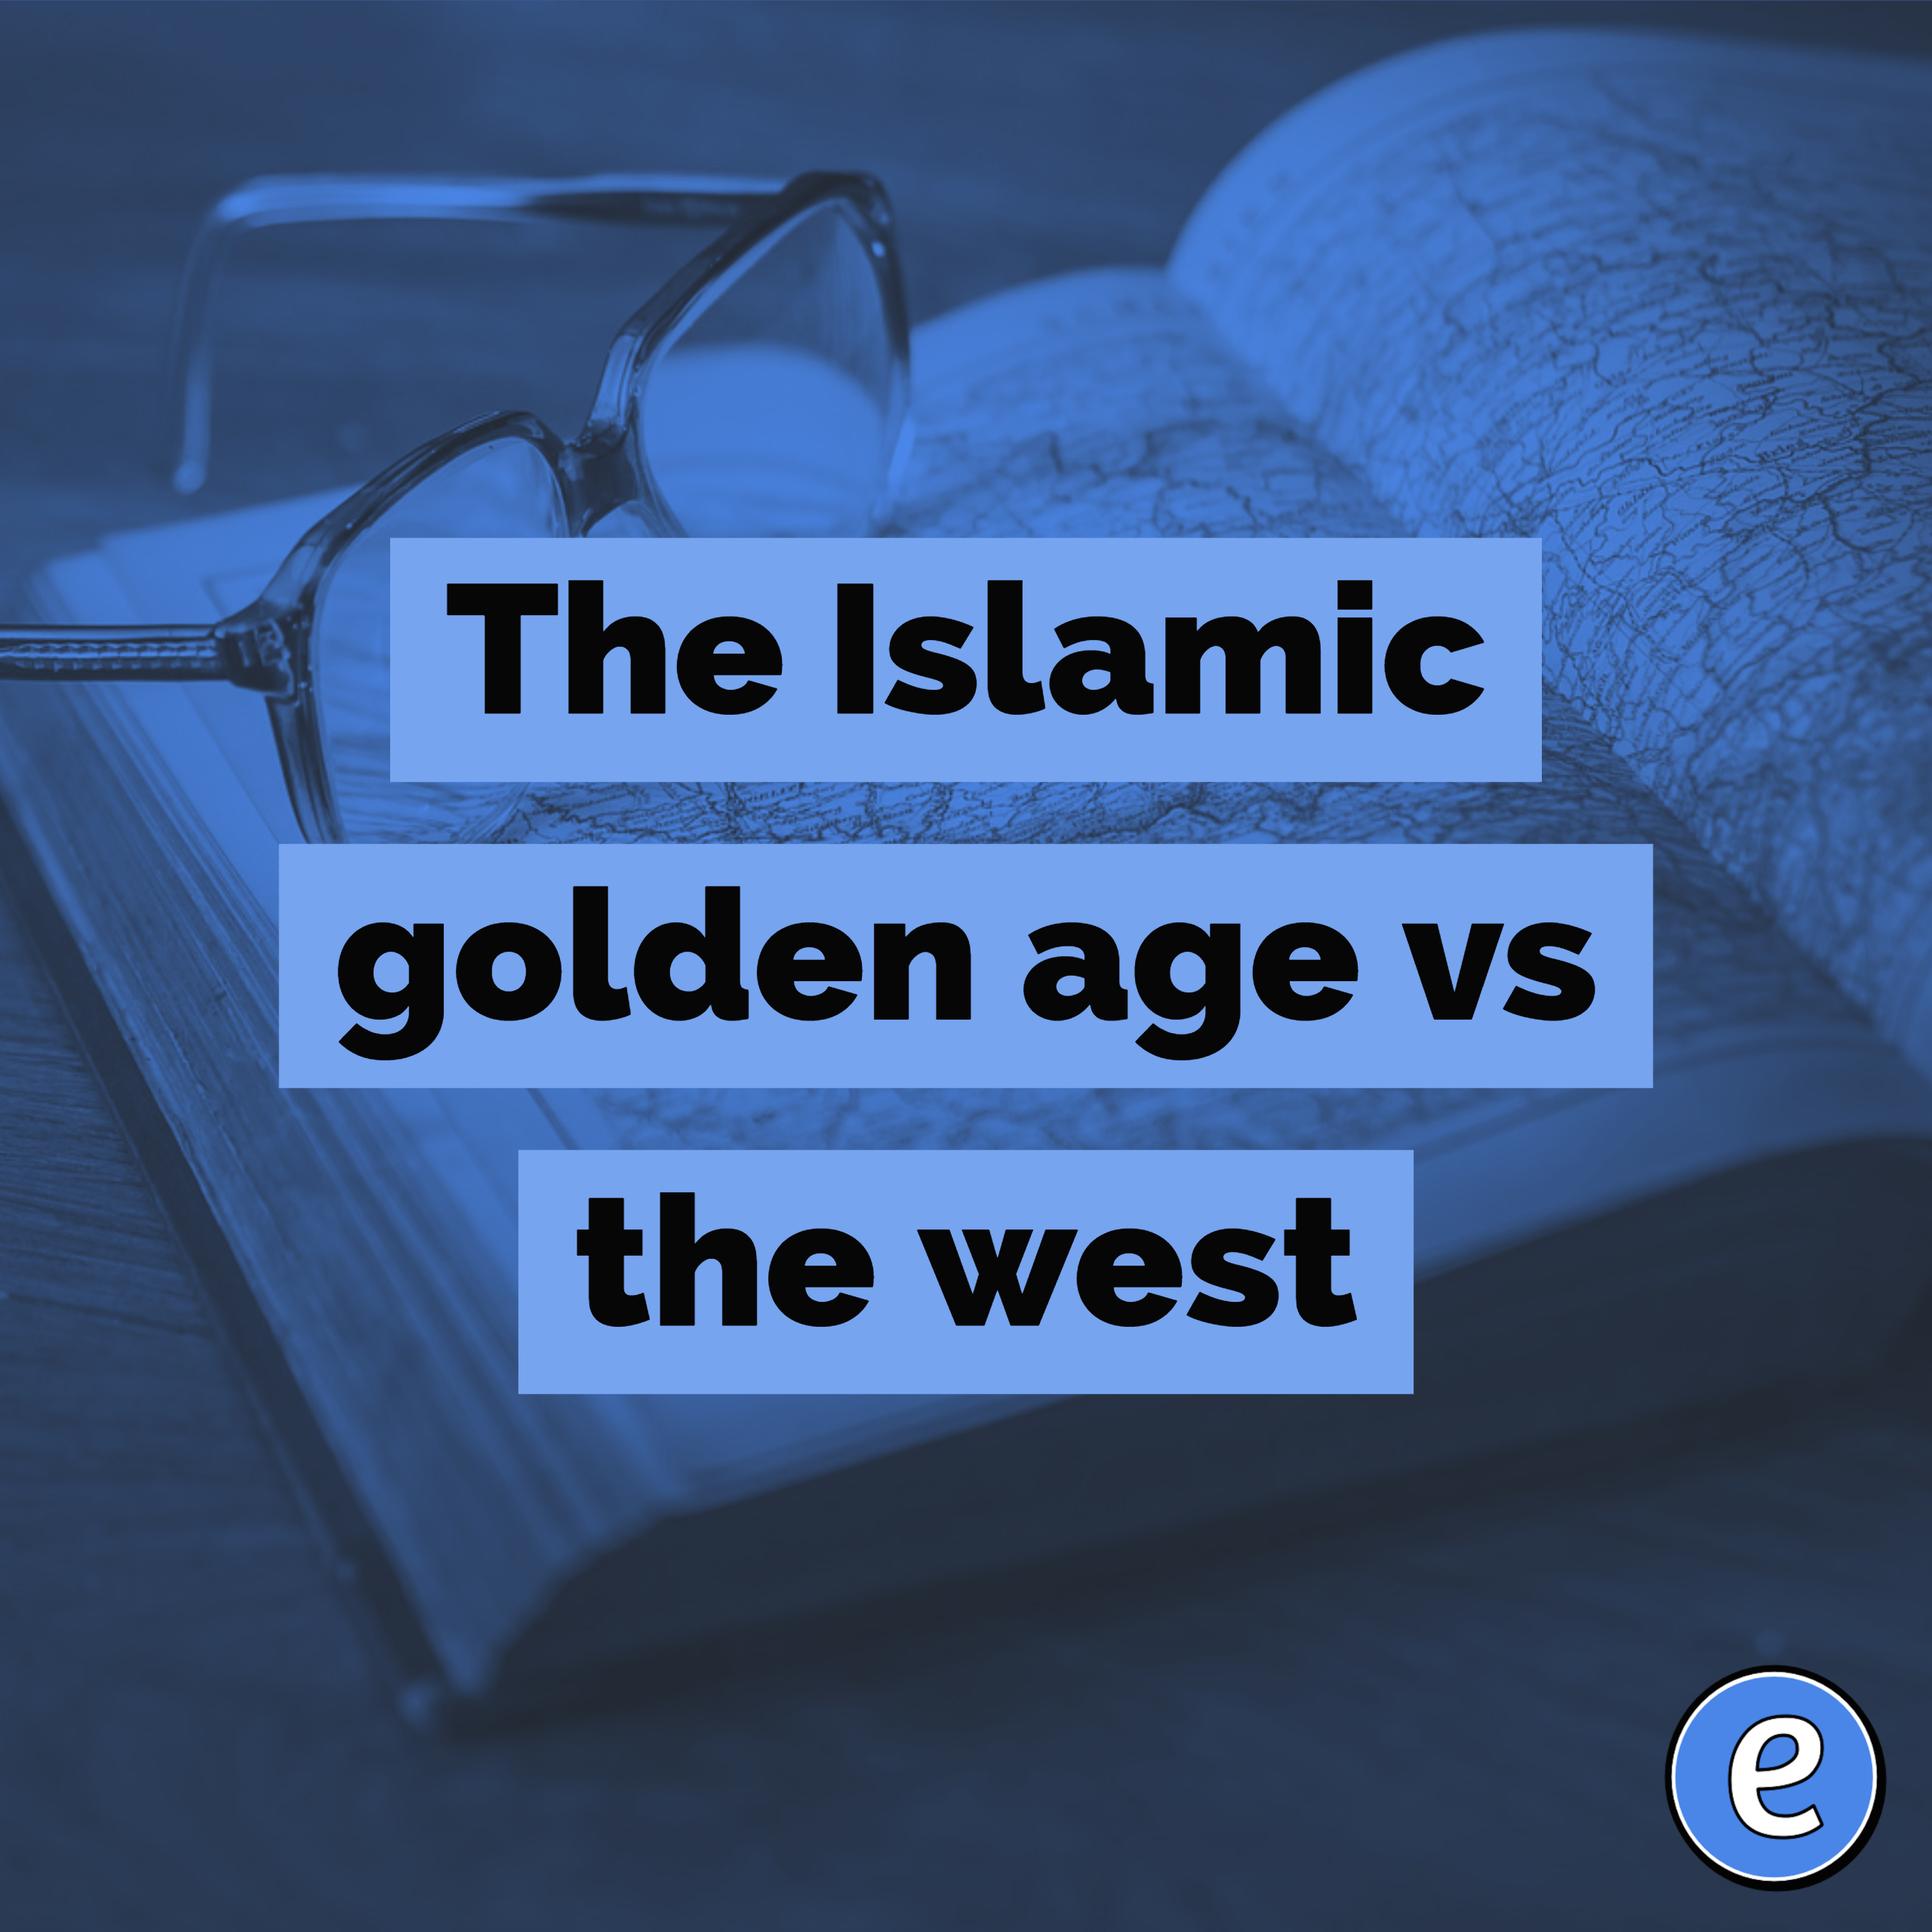 The Islamic golden age vs the west